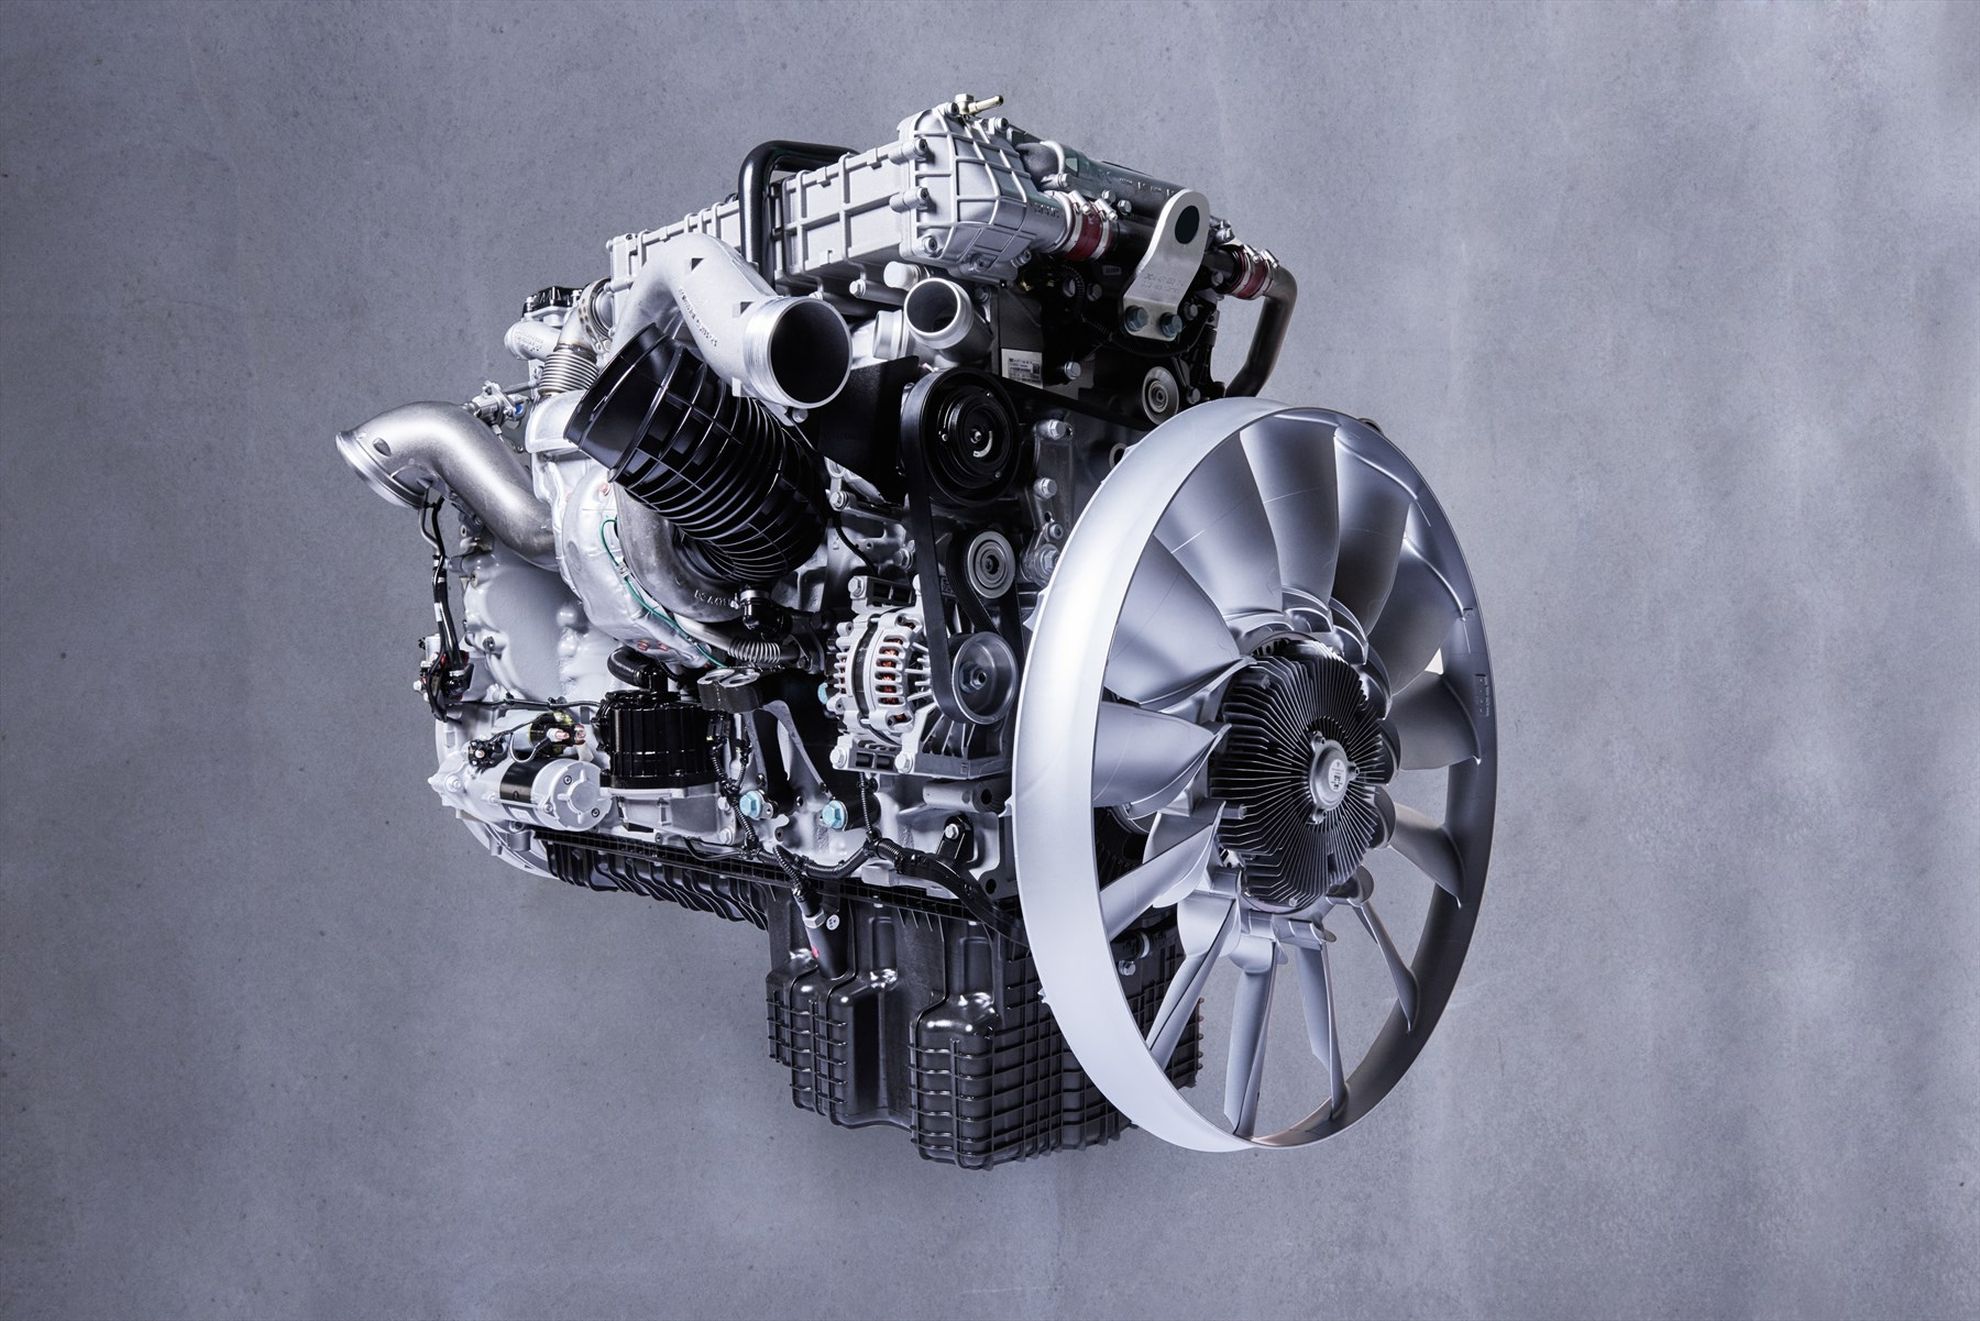 The latest generation Mercedes-Benz OM 471 engine: lower fuel consumption and CO2 emissions, more output and torque